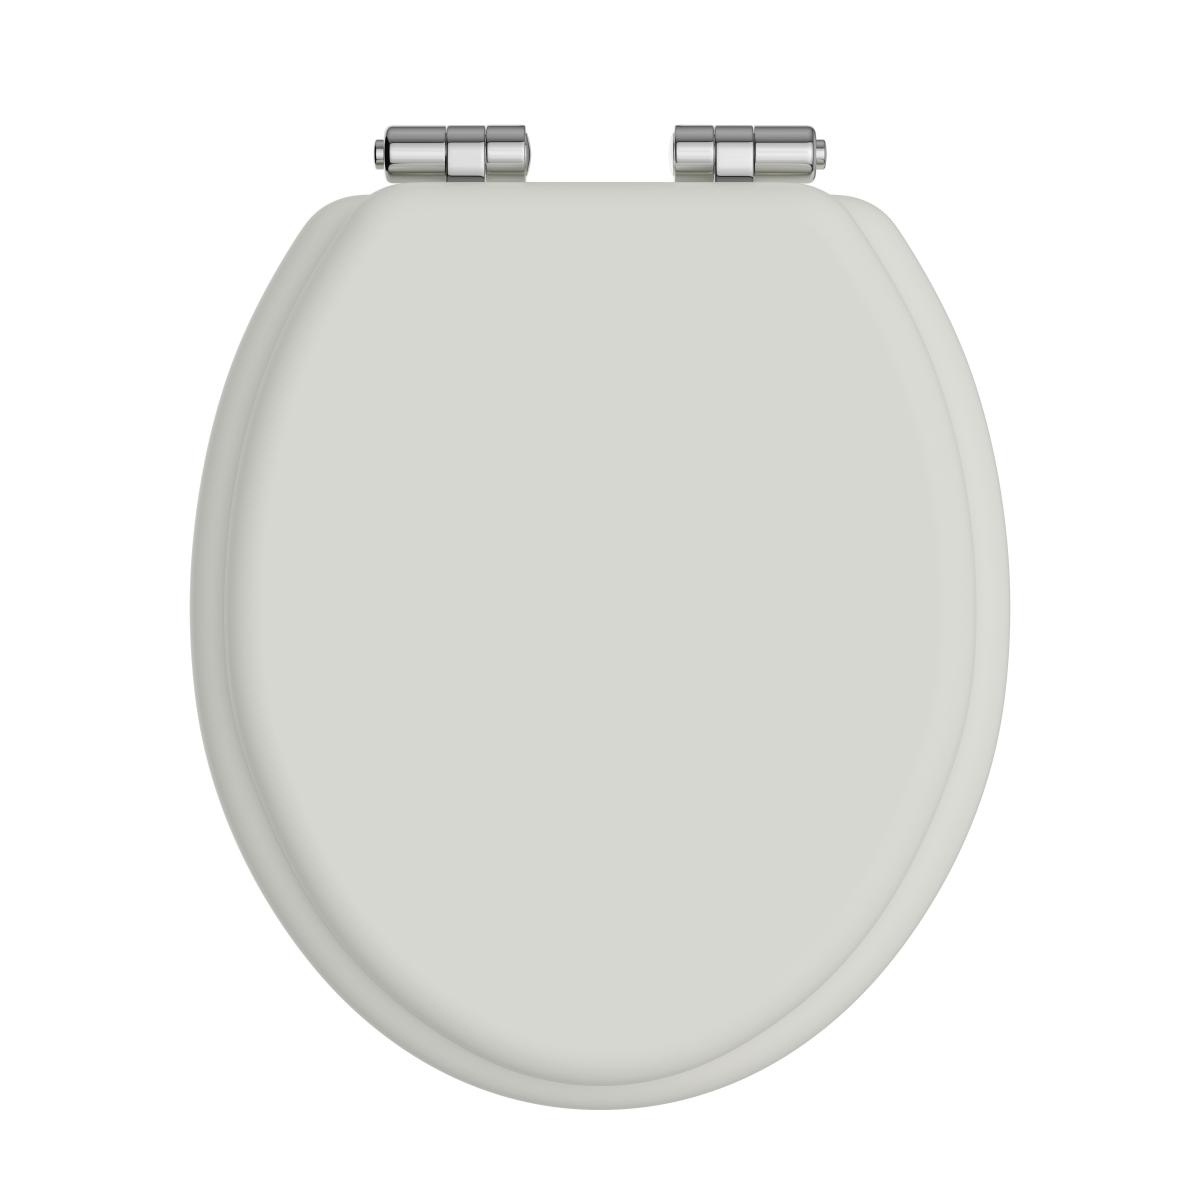 Toilet Seat Soft Close Chrome Hinges - Chantilly